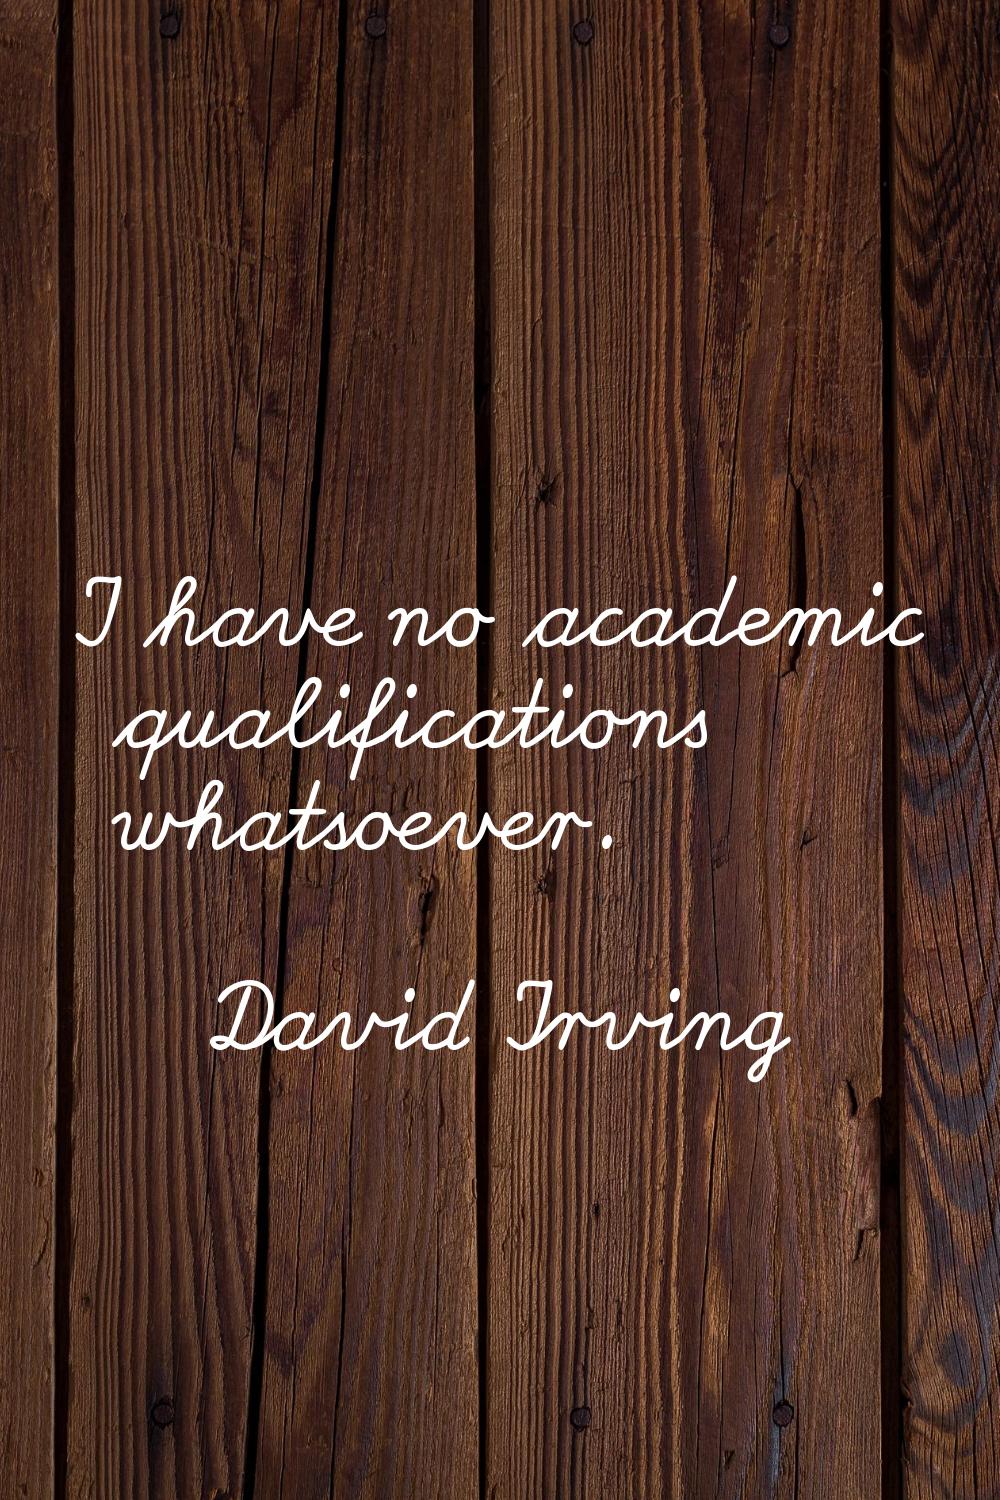 I have no academic qualifications whatsoever.